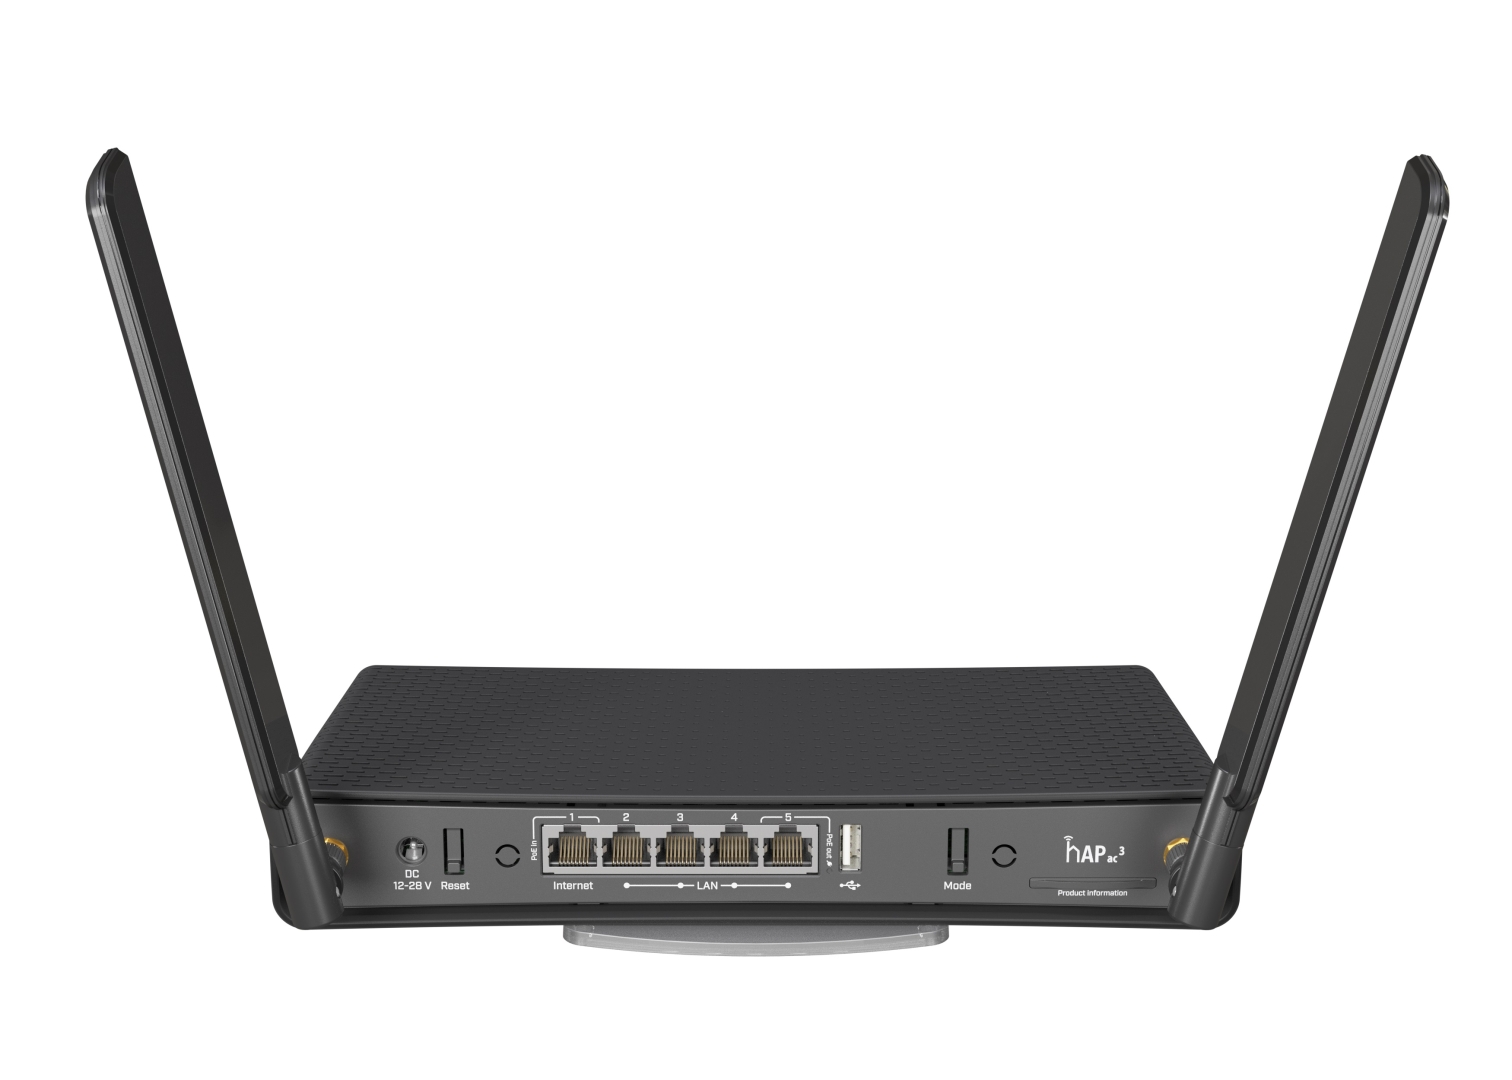 bidragyder valg Afbrydelse MIKROTIK wireless dual-band router with 5 Gigabit Ethernet ports and  external high gain antennas for more coverage, hAP ac3 with RouterOS L4  license (RBD53iG-5HacD2HnD) - The source for WiFi products at best